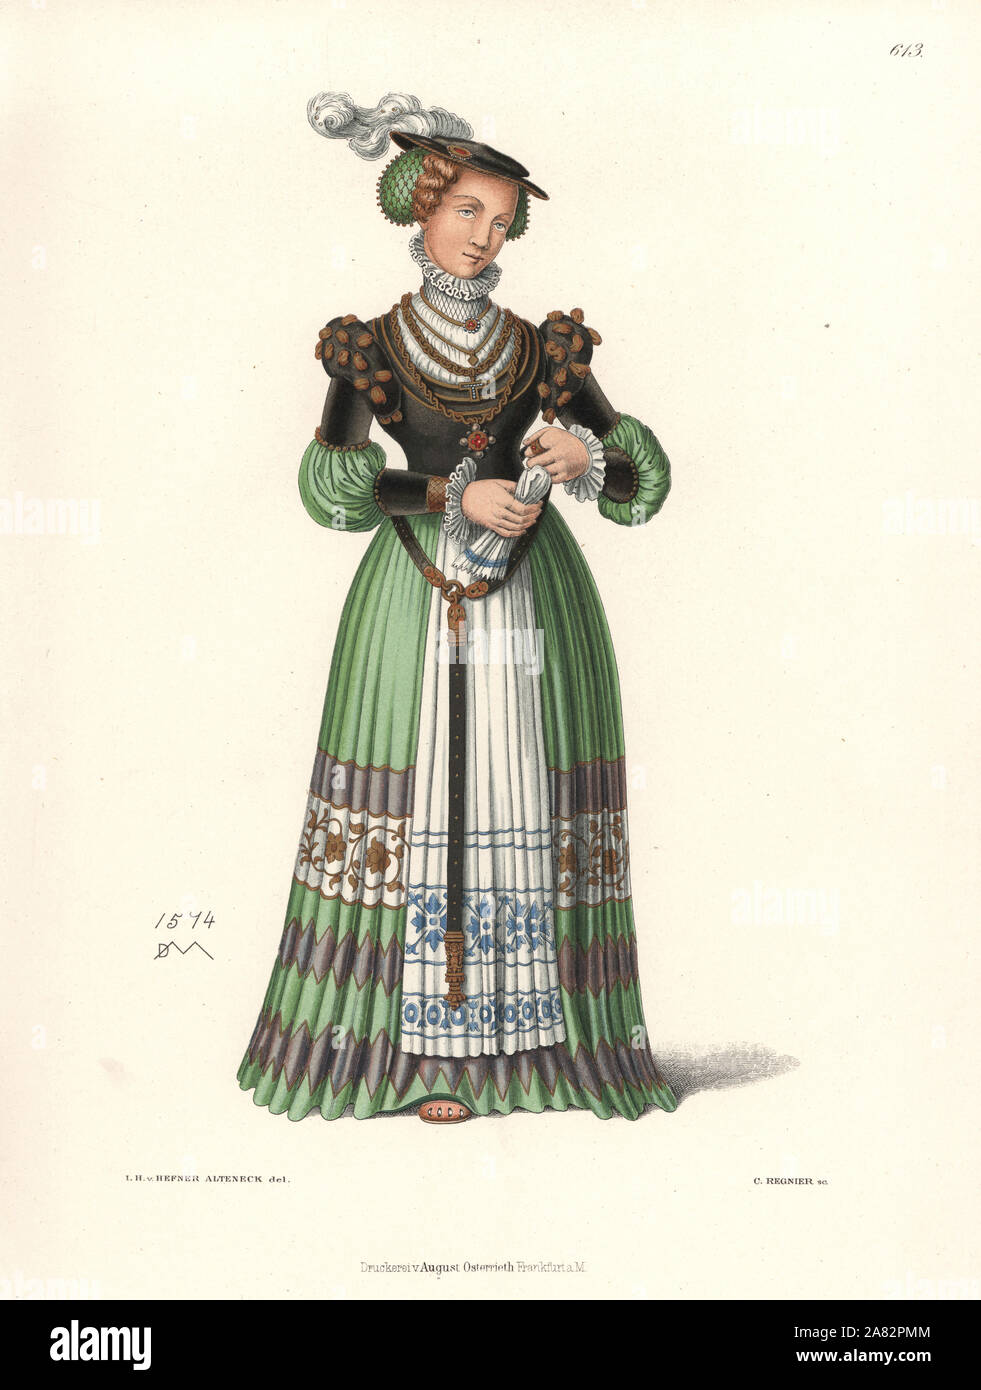 Costume of a noble woman from a colour pen drawing by a German master with monogram DM, 1574. Chromolithograph from Hefner-Alteneck's Costumes, Artworks and Appliances from the Middle Ages to the 17th Century, Frankfurt, 1889. Illustration by Dr. Jakob Heinrich von Hefner-Alteneck, lithographed by C. Regnier. Dr. Hefner-Alteneck (1811-1903) was a German museum curator, archaeologist, art historian, illustrator and etcher. Stock Photo